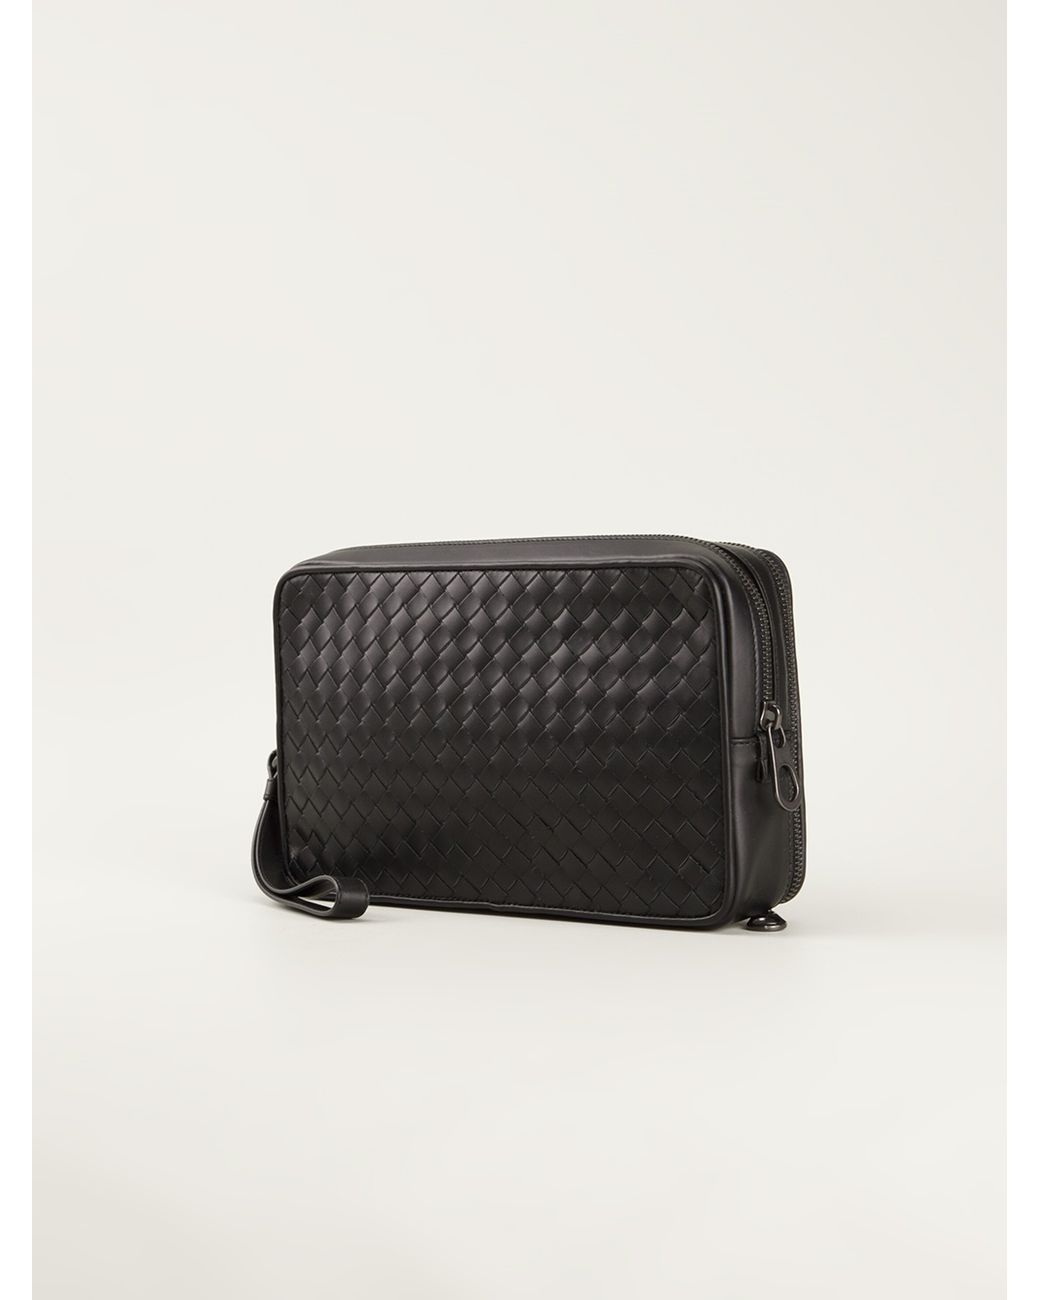 Stylish Black and Weaving Design Clutch For Men